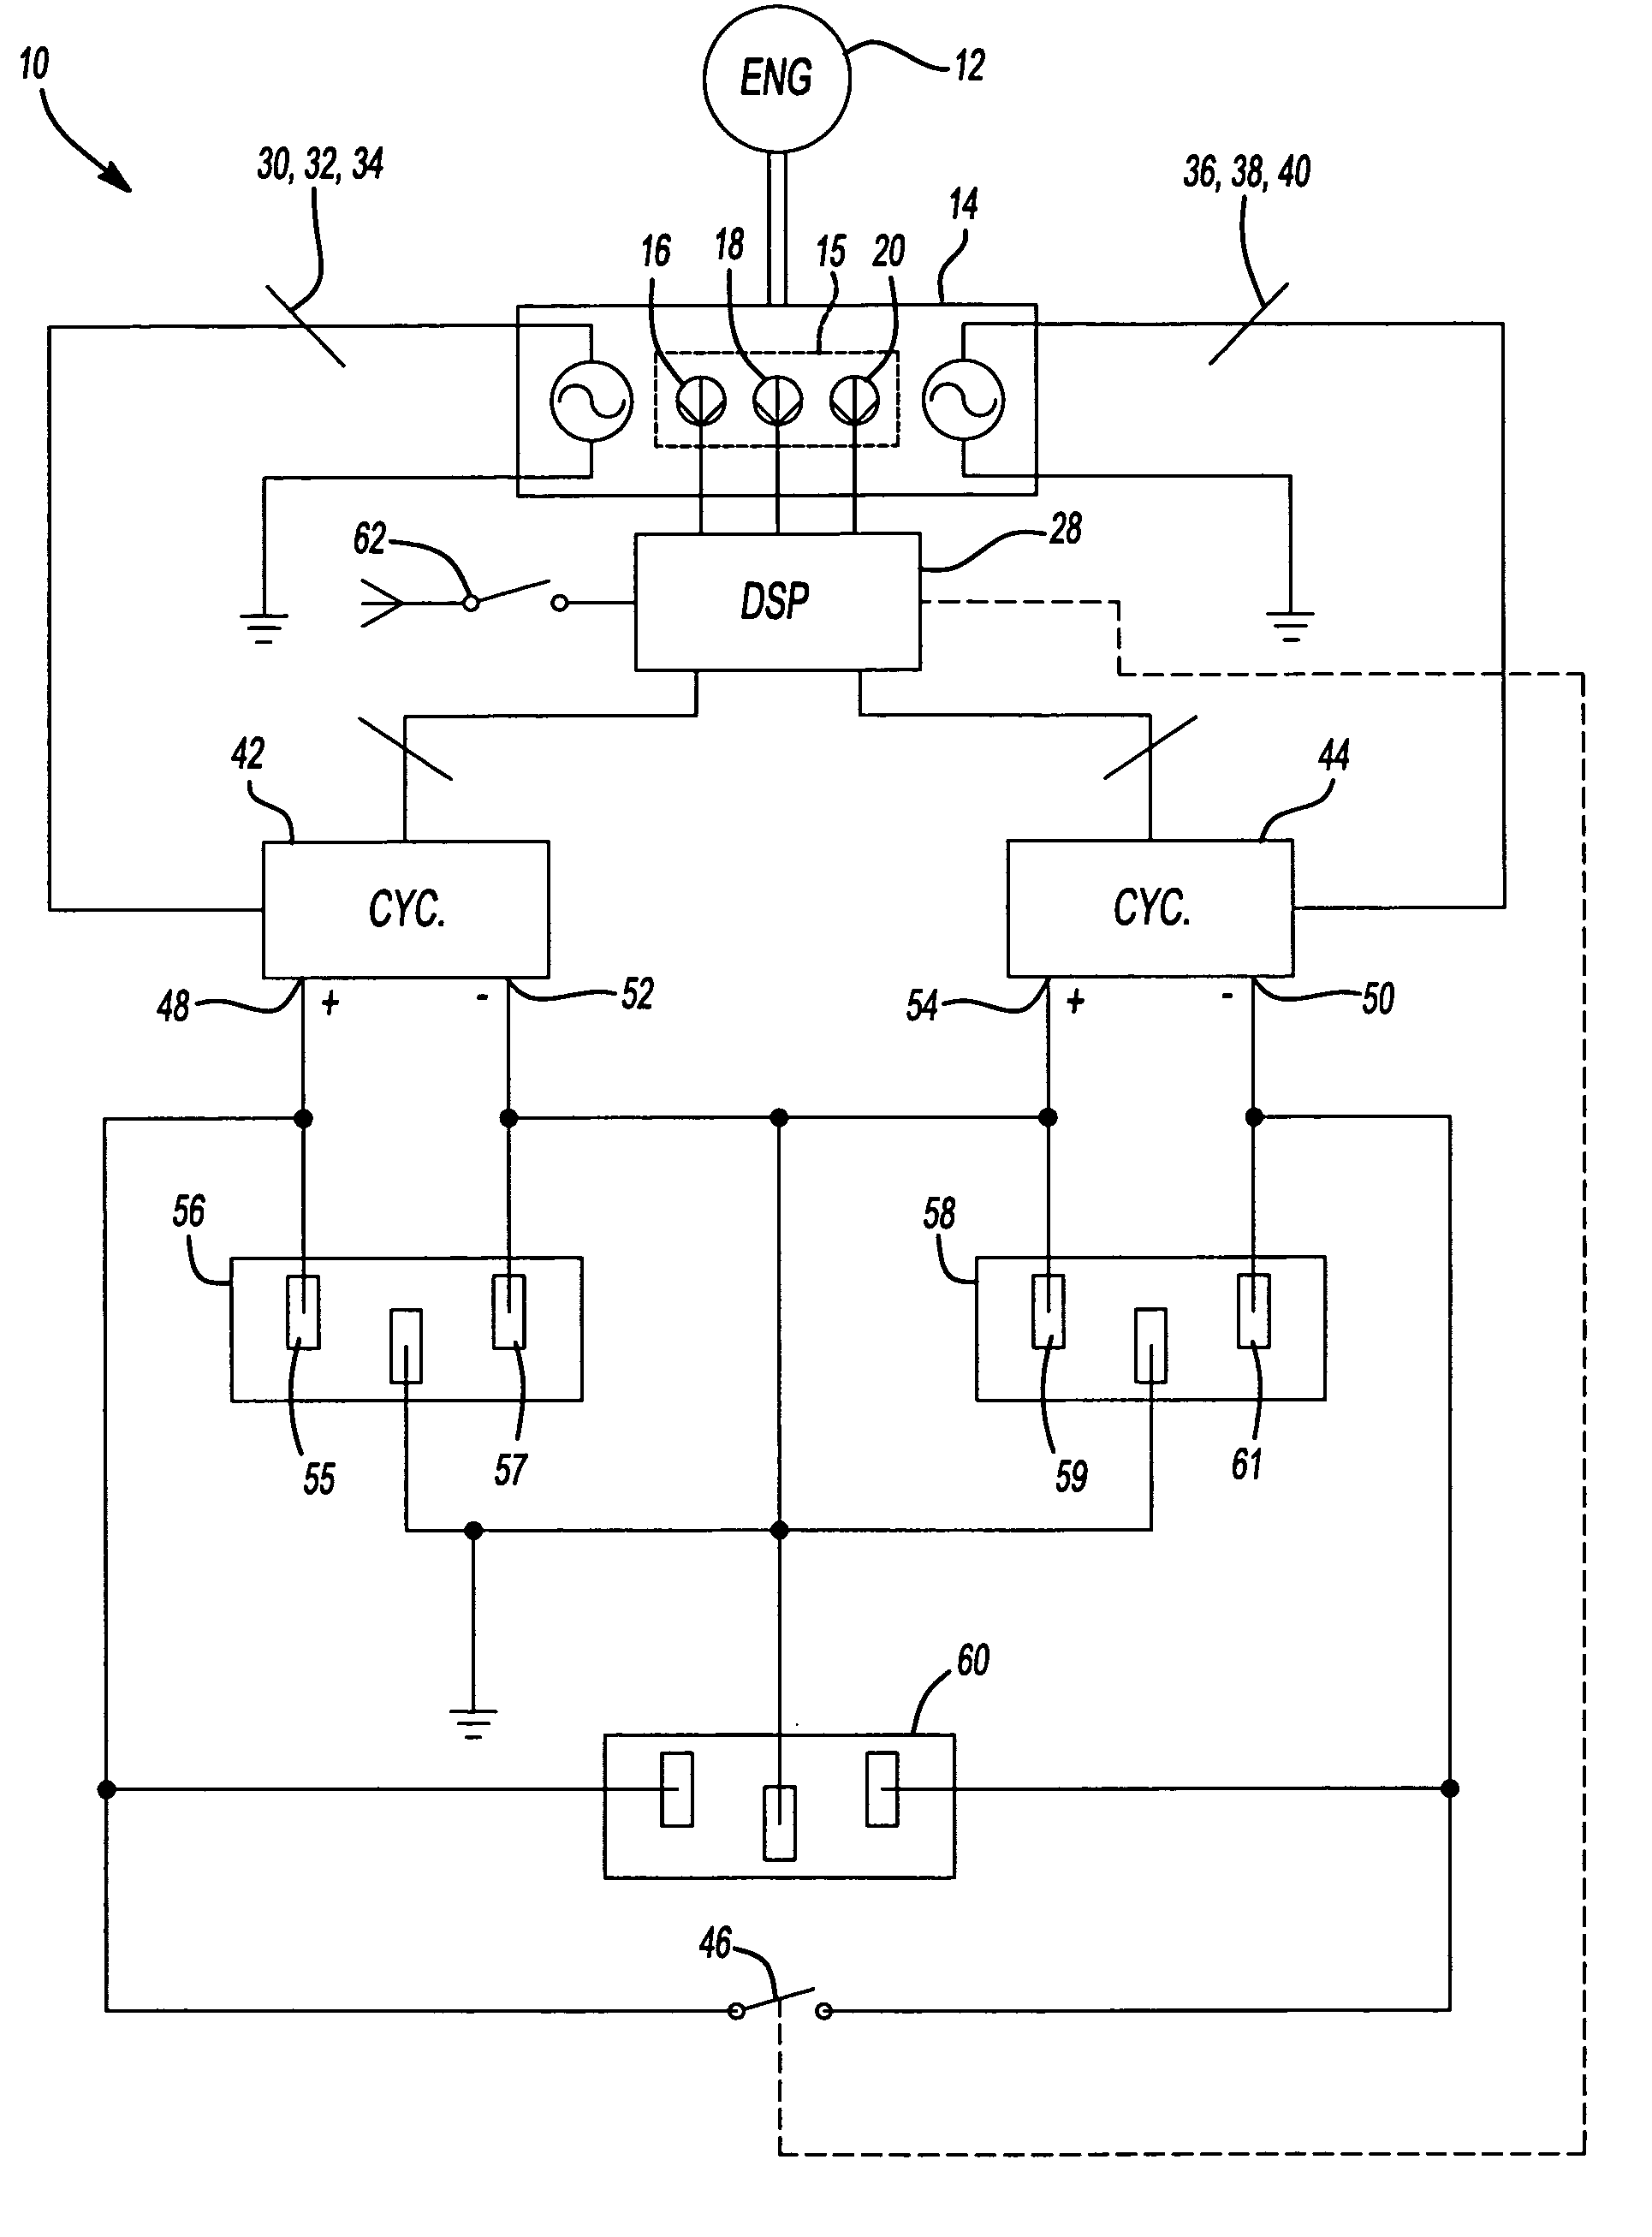 Generator with dual cycloconverter for 120/240 VAC operation